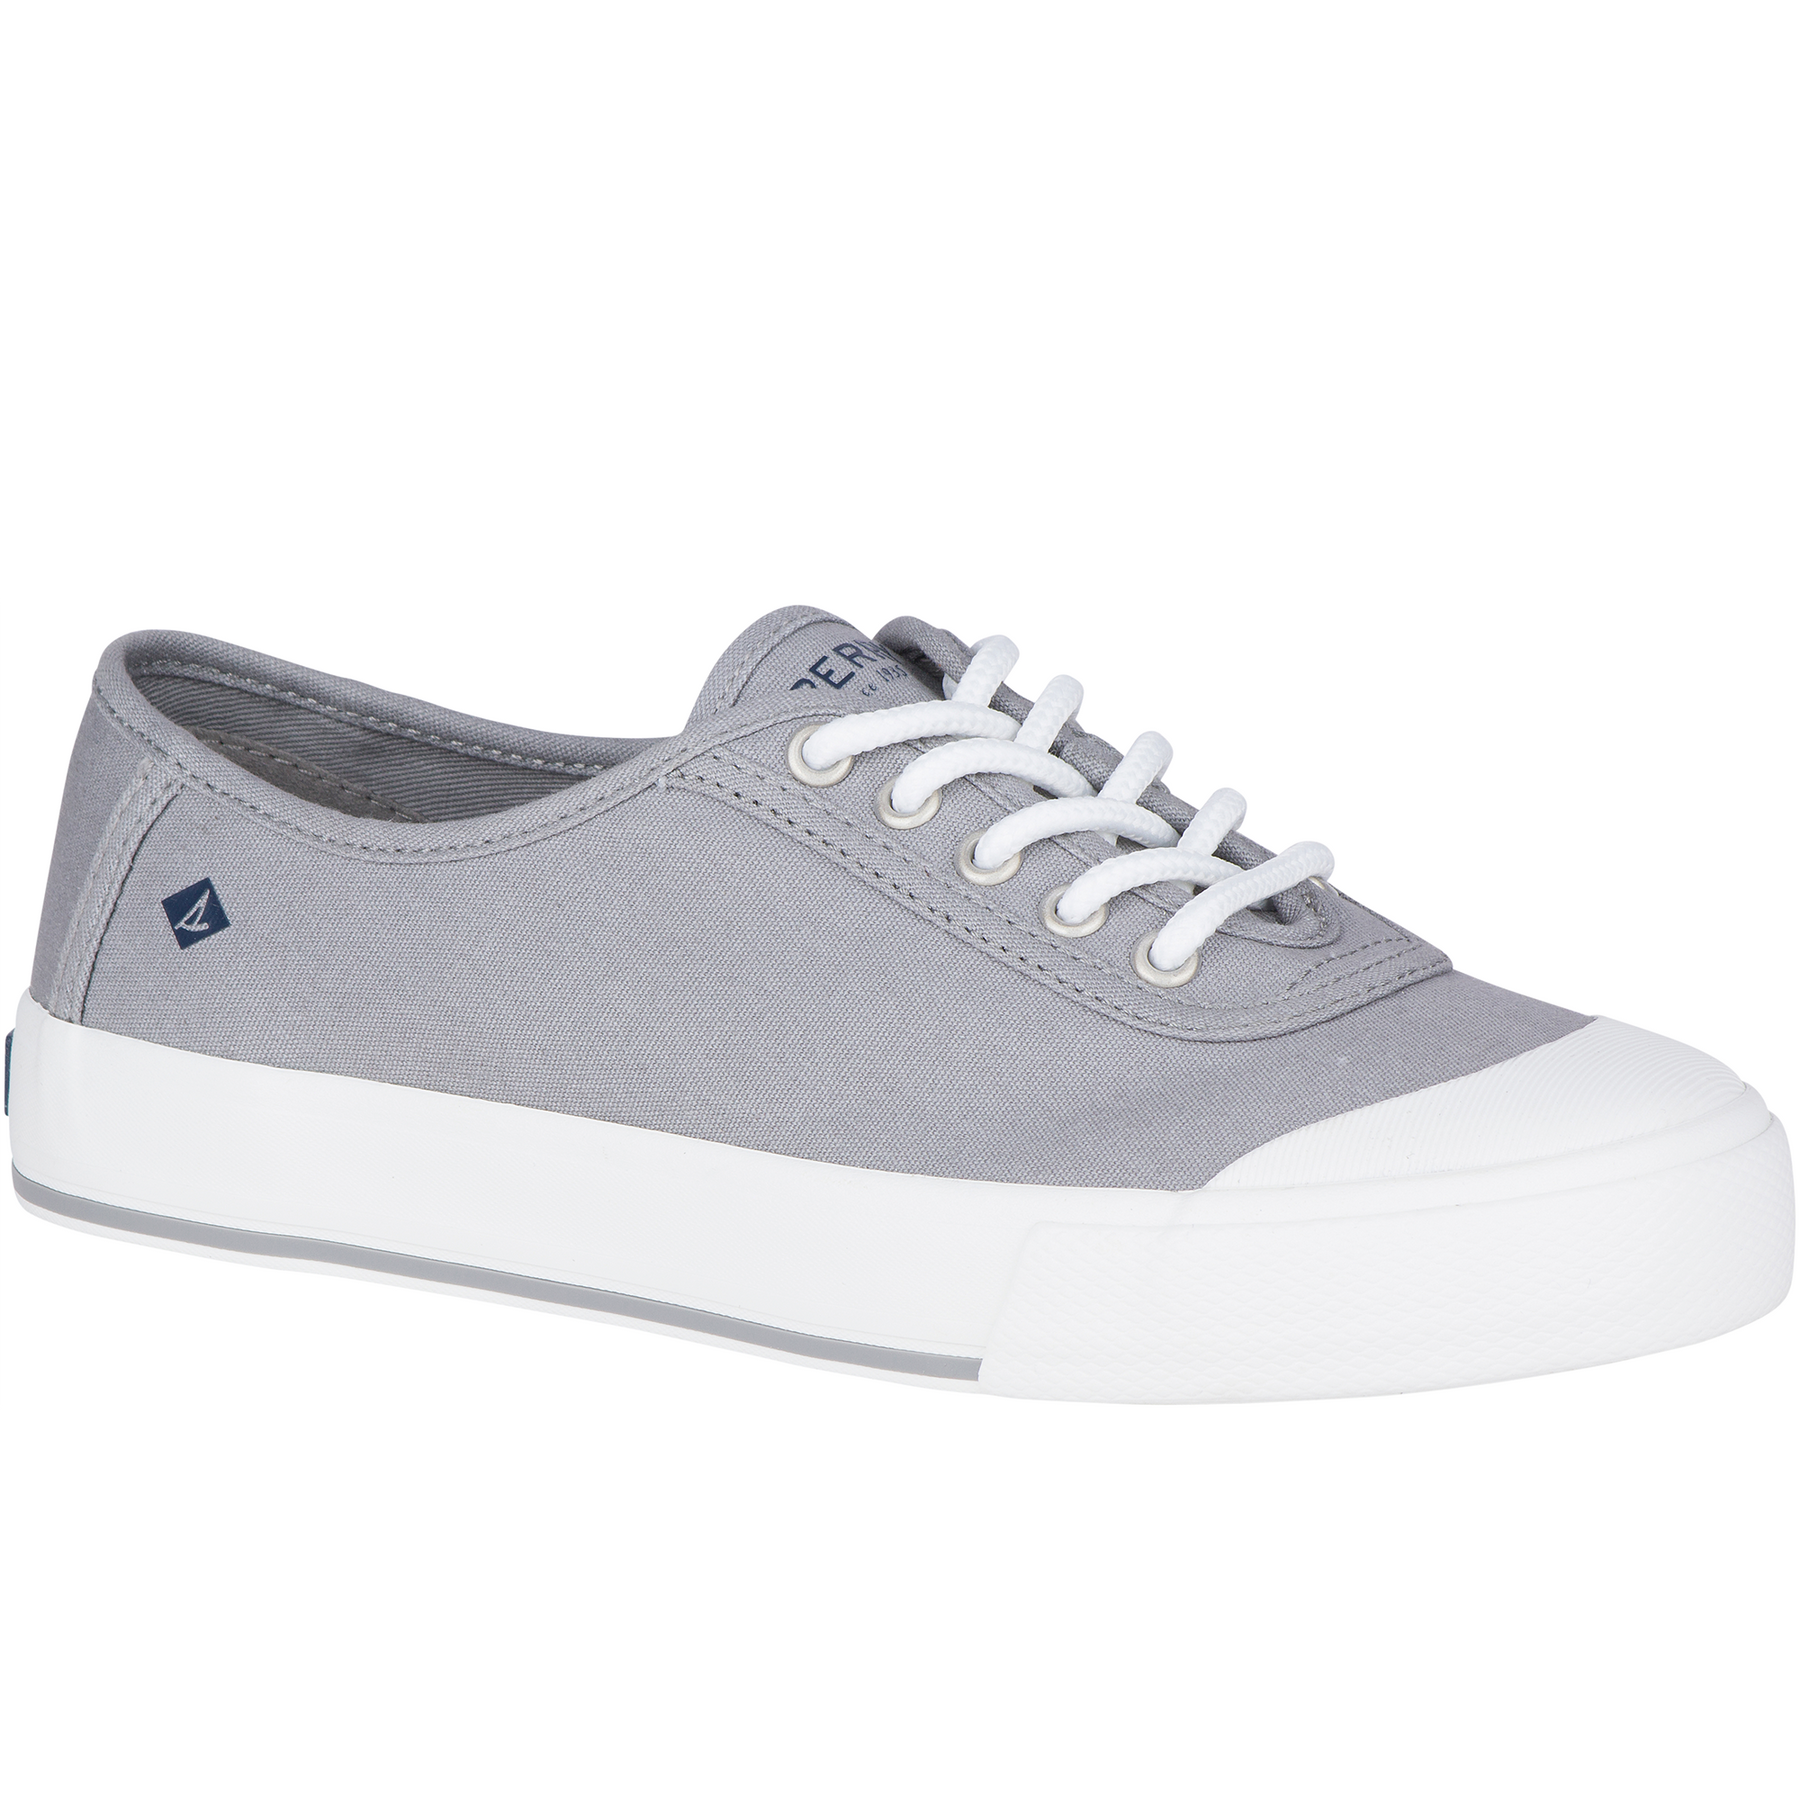 Women's Crest Edge Saturated Grey Sneakers STS83749